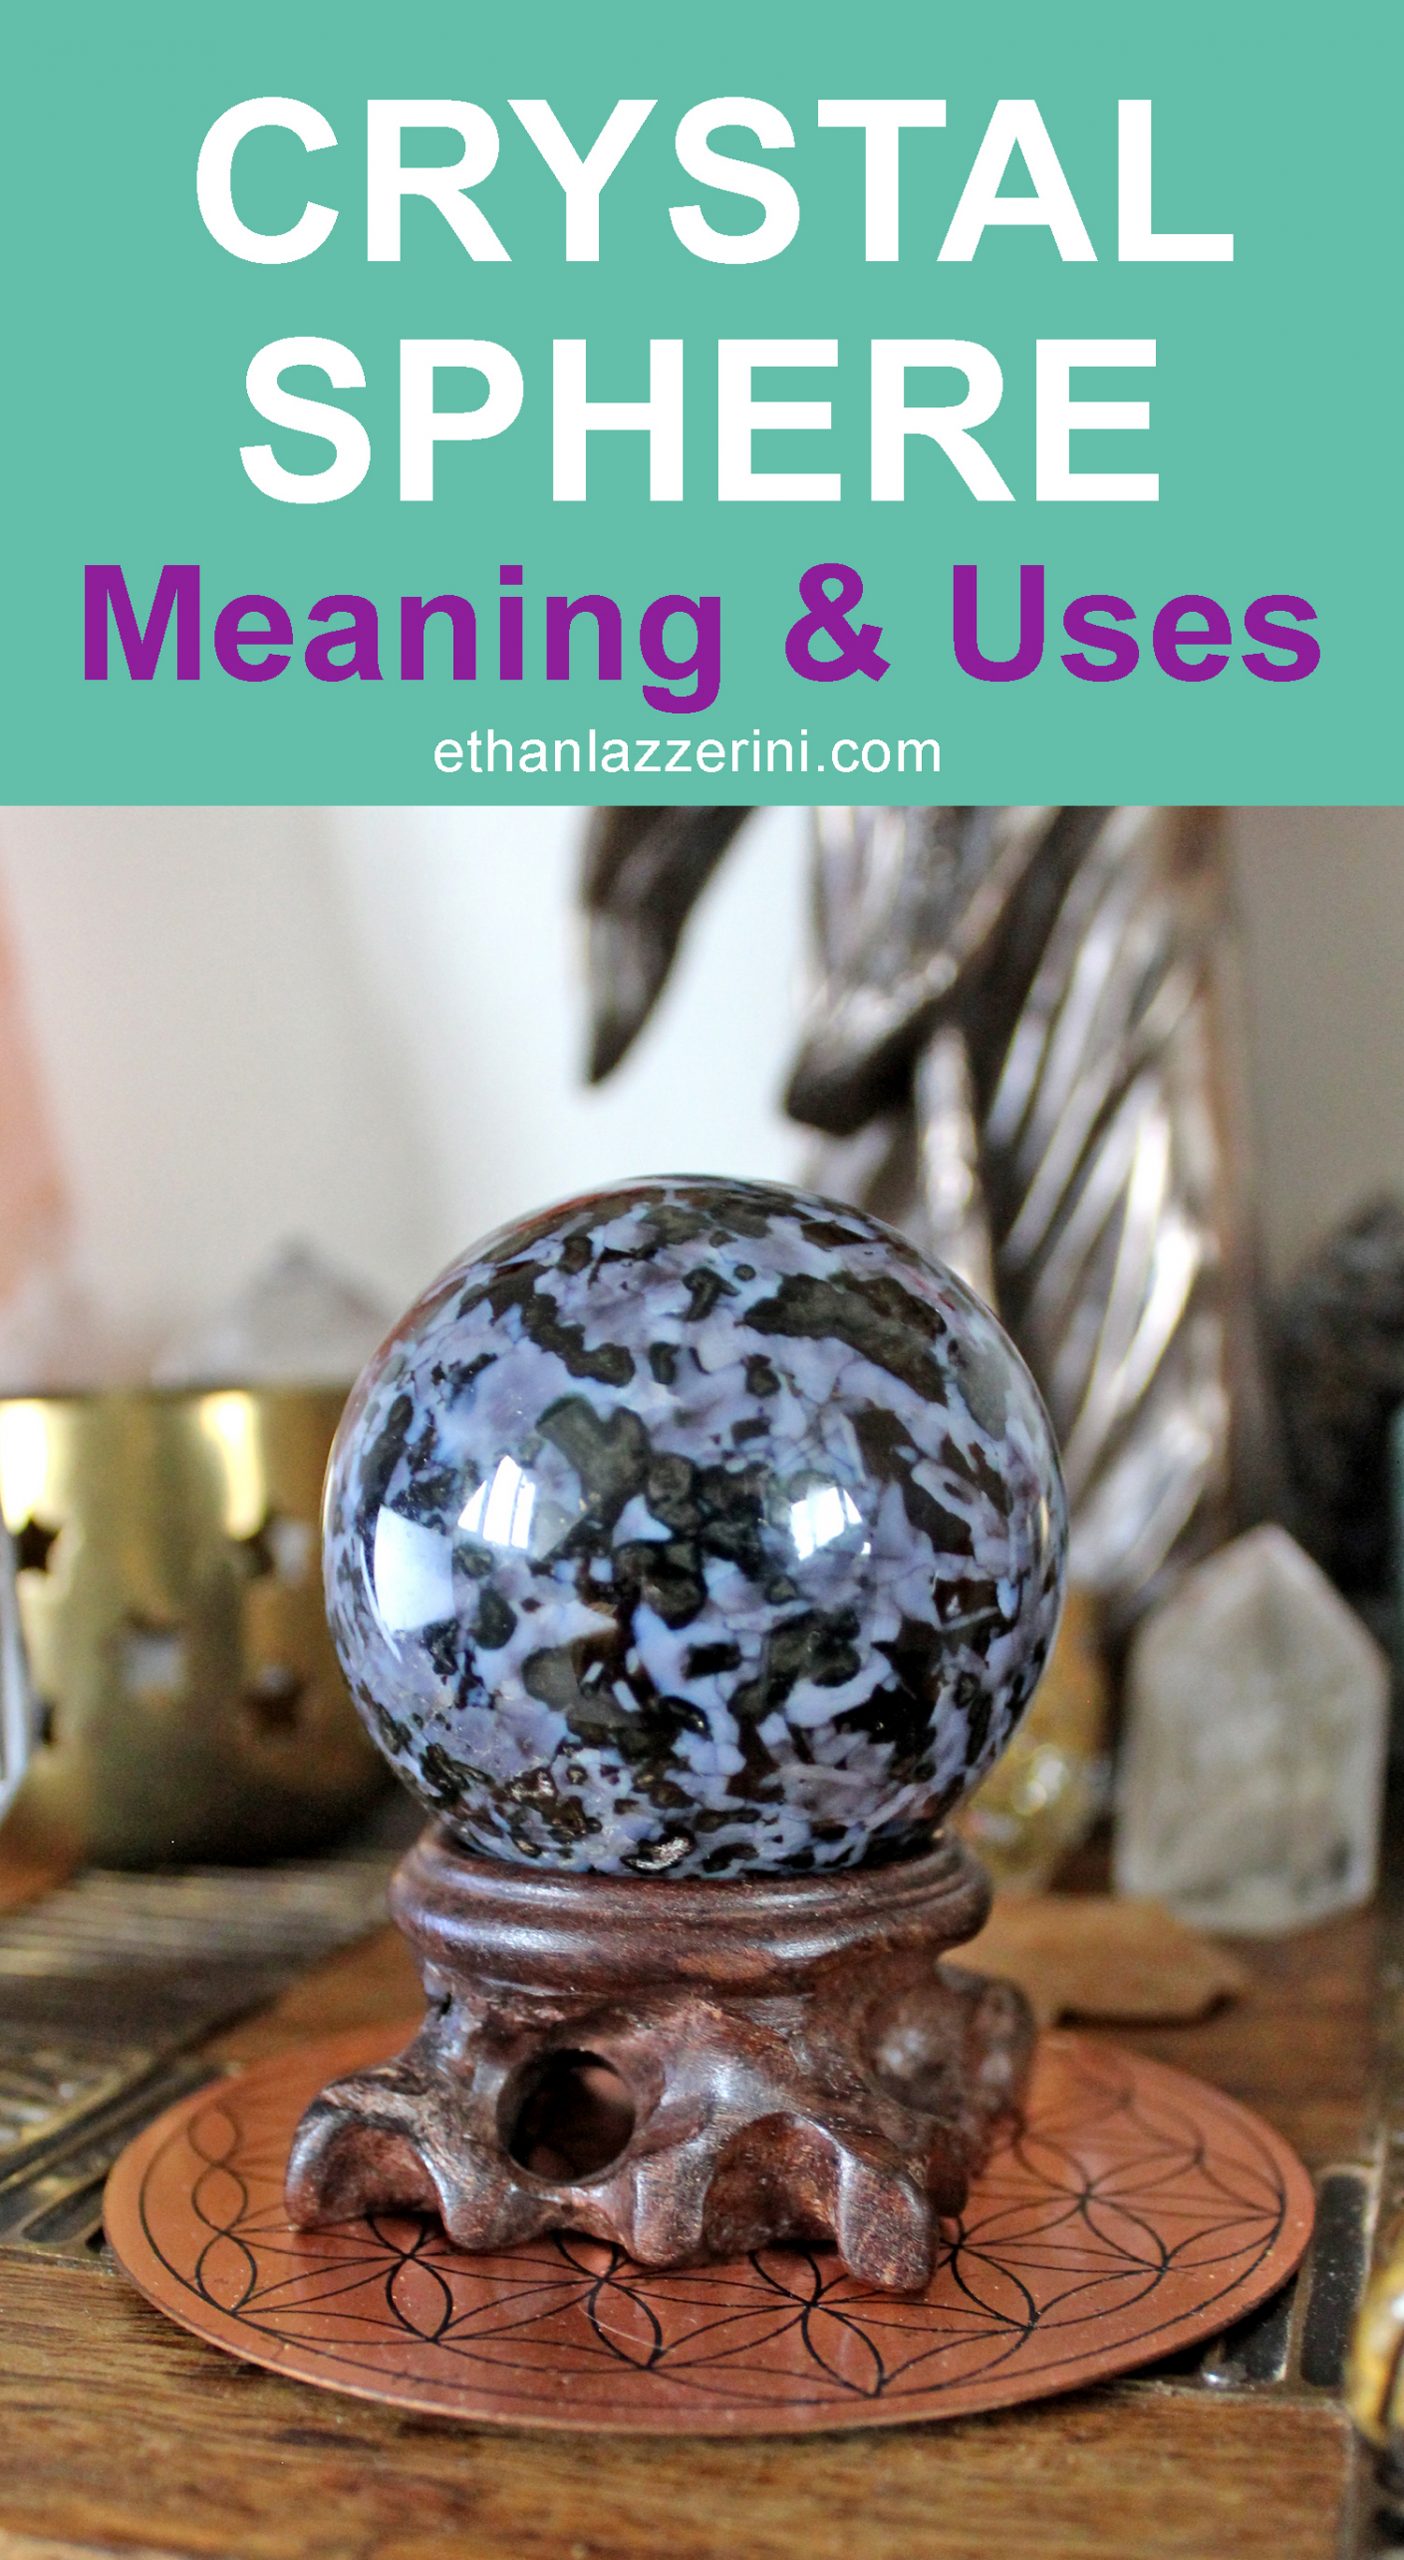 blog post graphic for crystal sphere meaning with Mystic Merlinite sphere